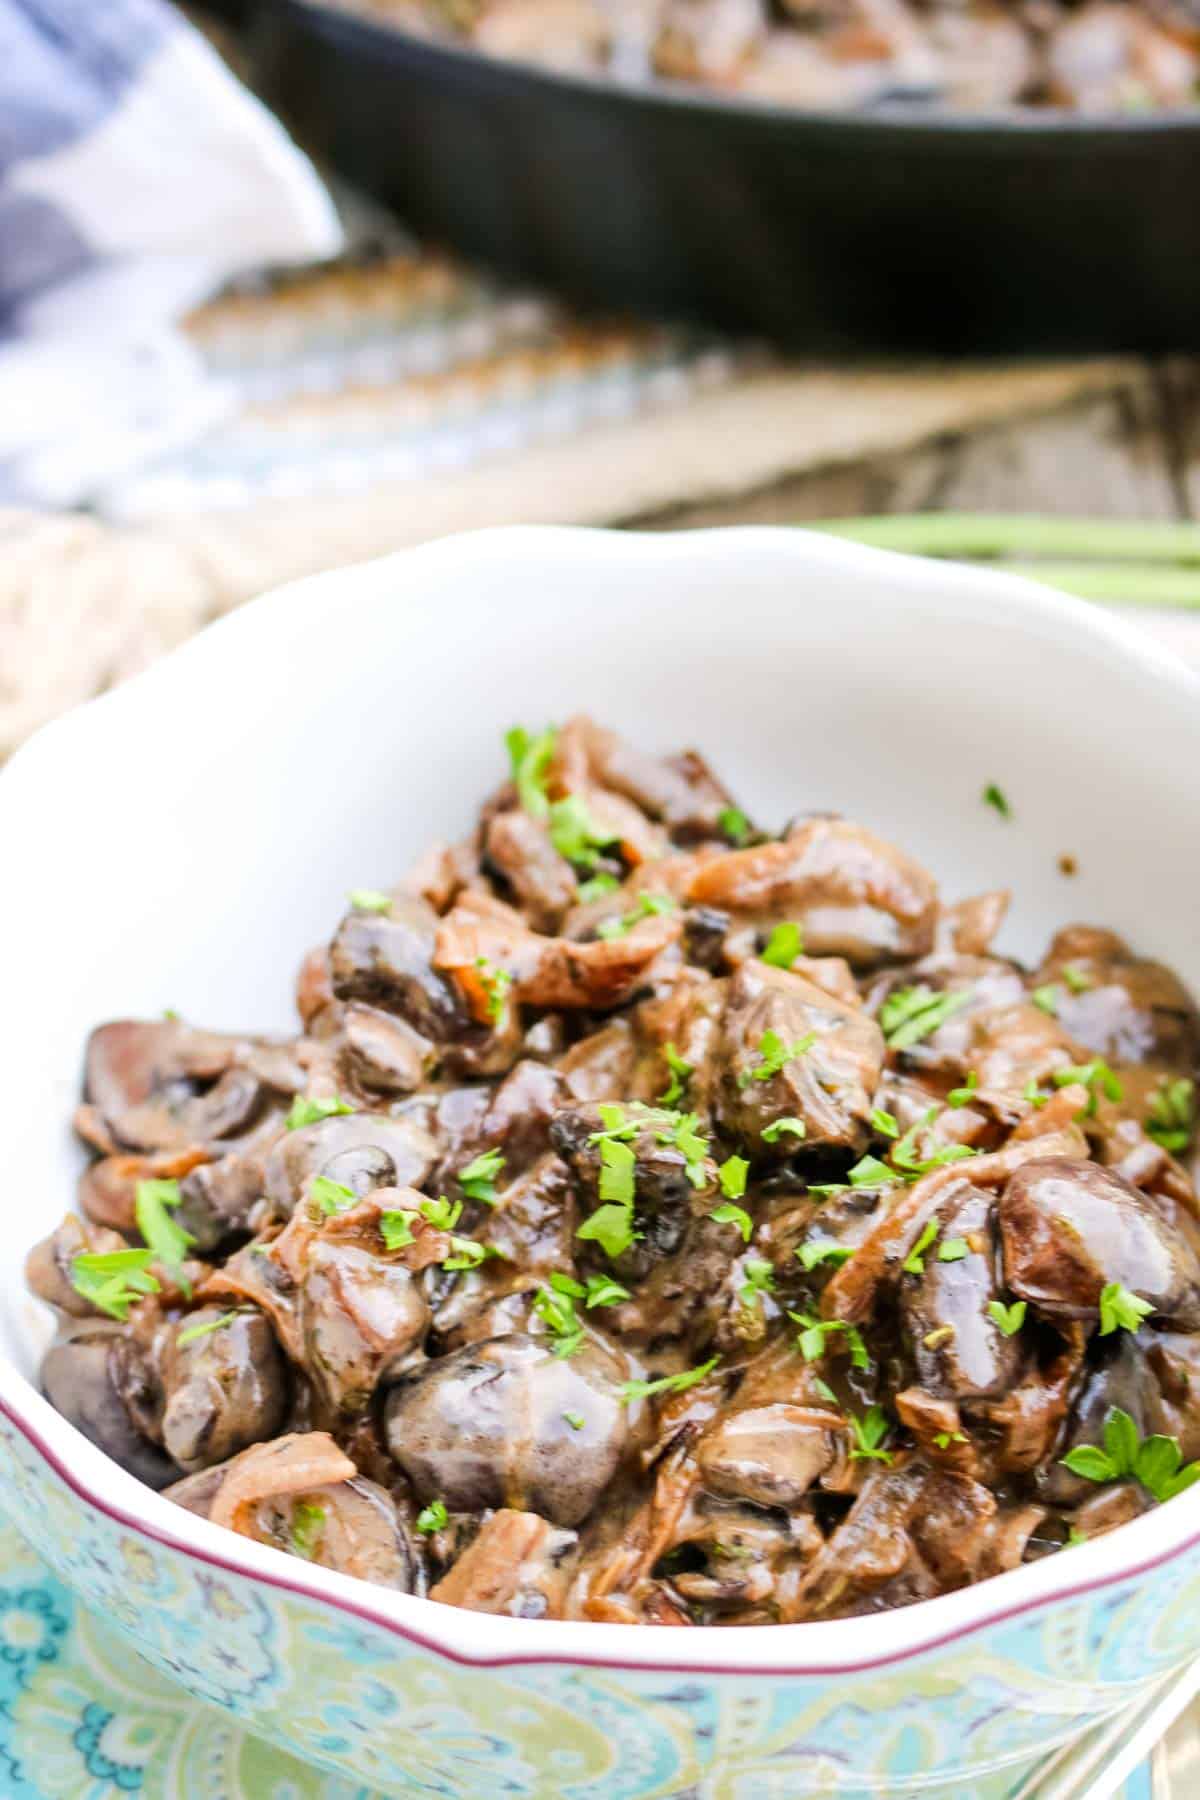 Creamed Mushrooms in a bowl with cast iron skillet in the back and parsley garnished